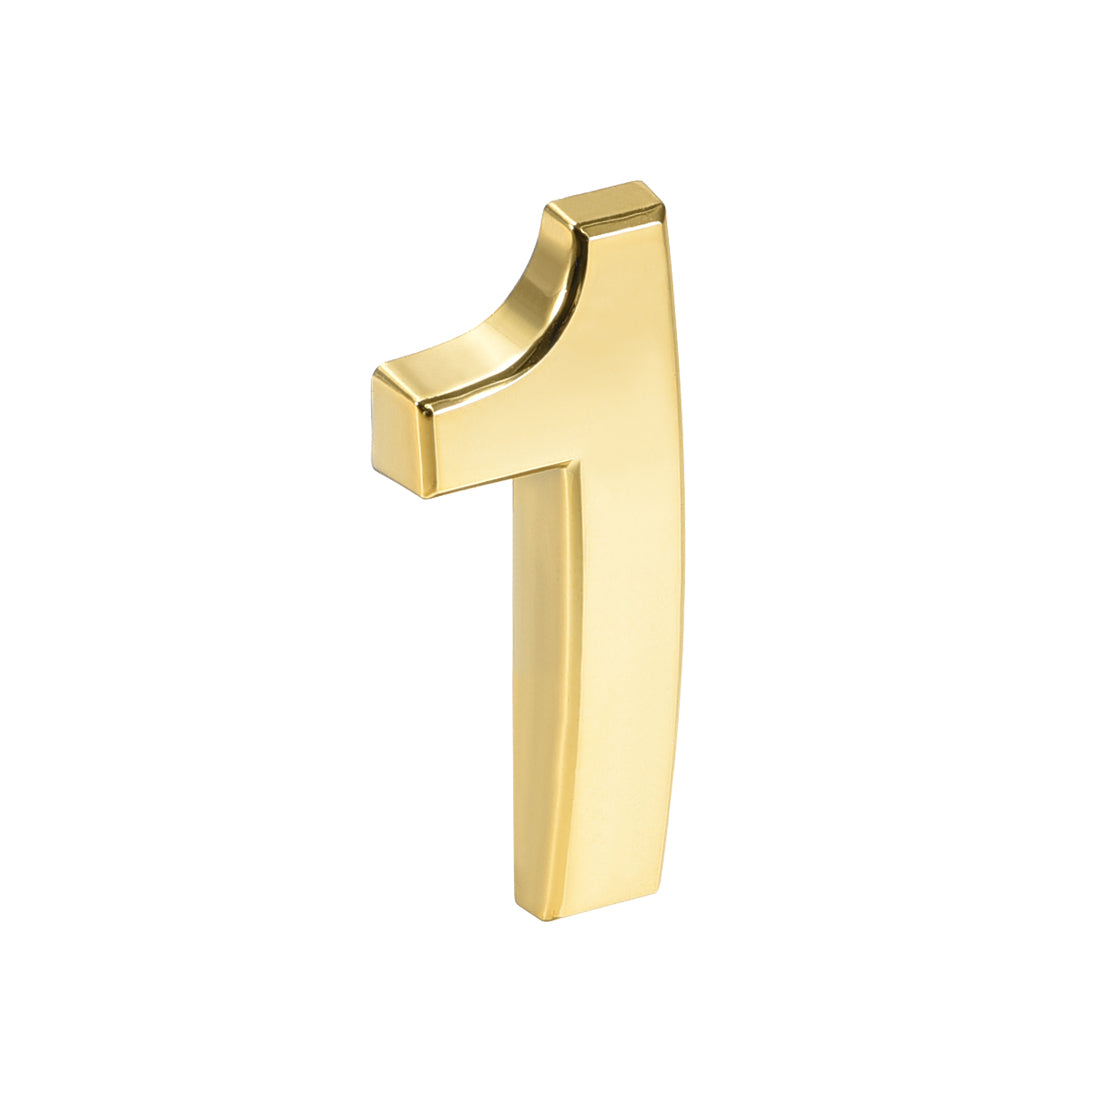 Uxcell Uxcell Self Adhesive House Number 2.76 Inch ABS Plastic Number 2 for House Hotel Mailbox Address Sign Gold Tone